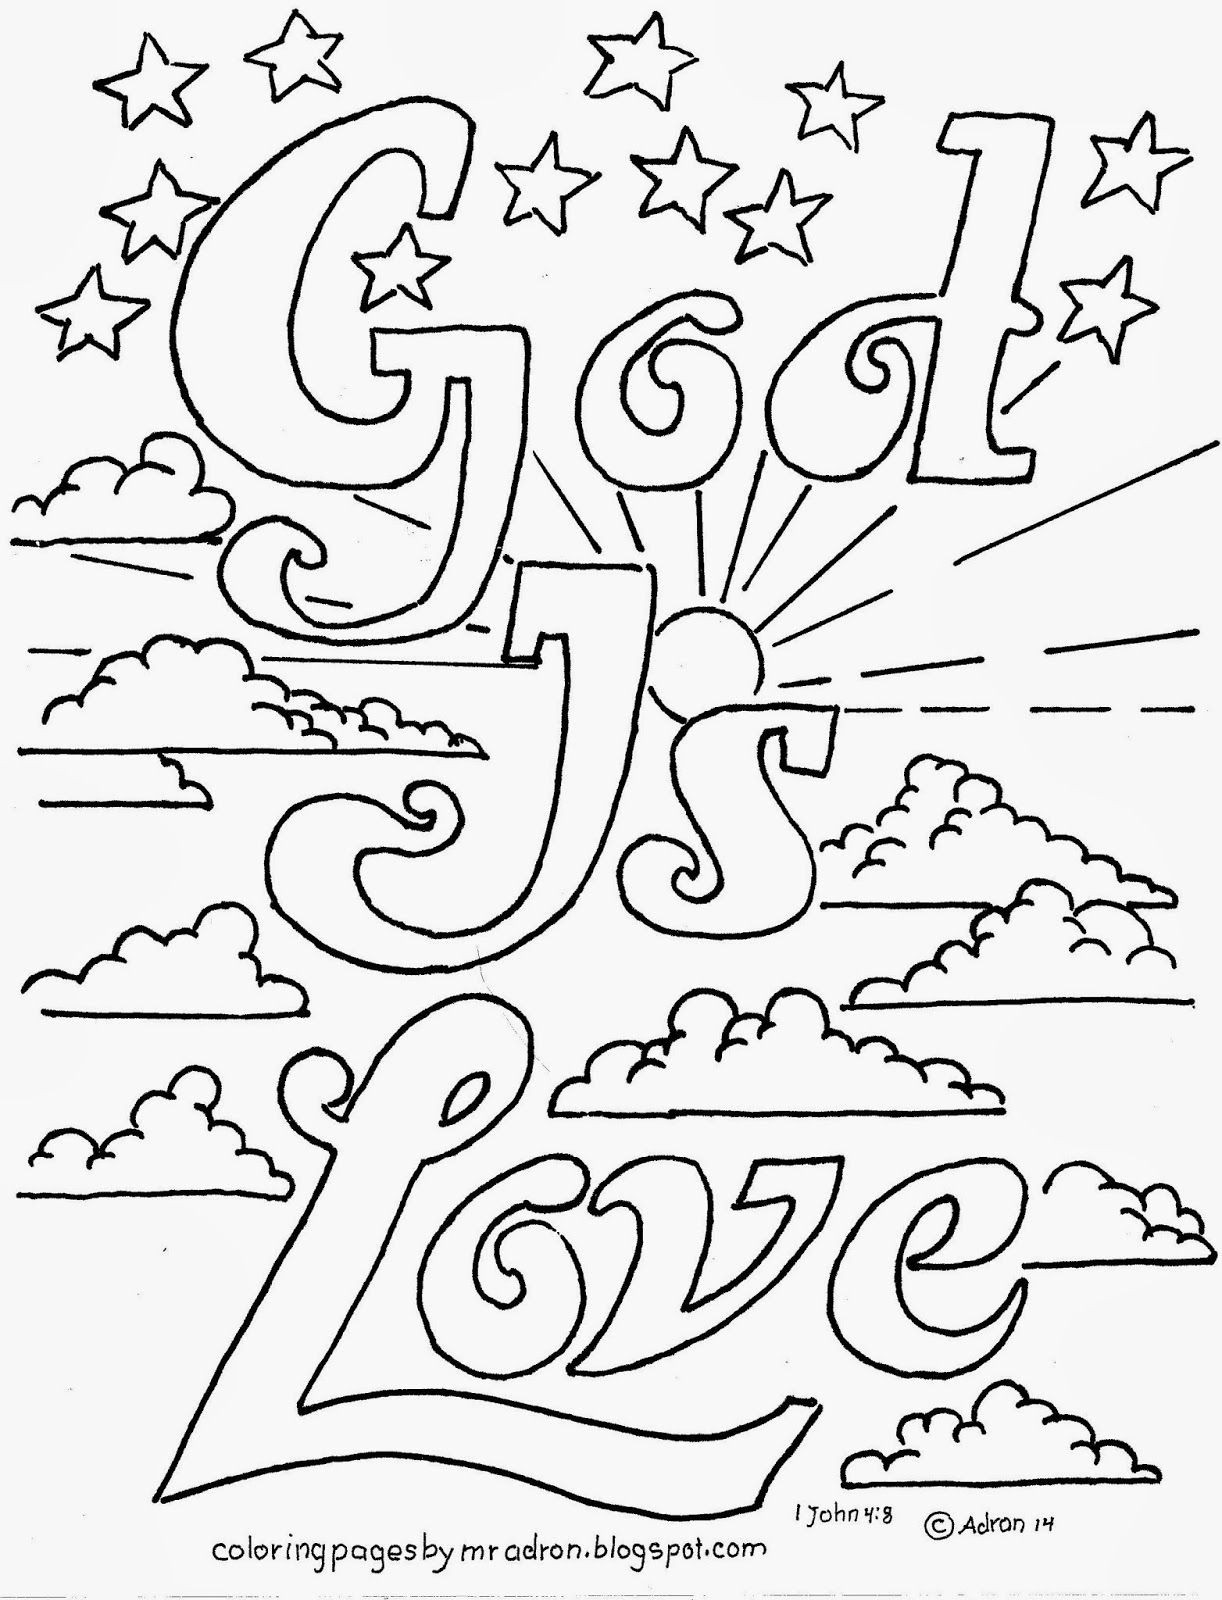 Printable Bible Coloring Pages
 Coloring Pages for Kids by Mr Adron God Is Love